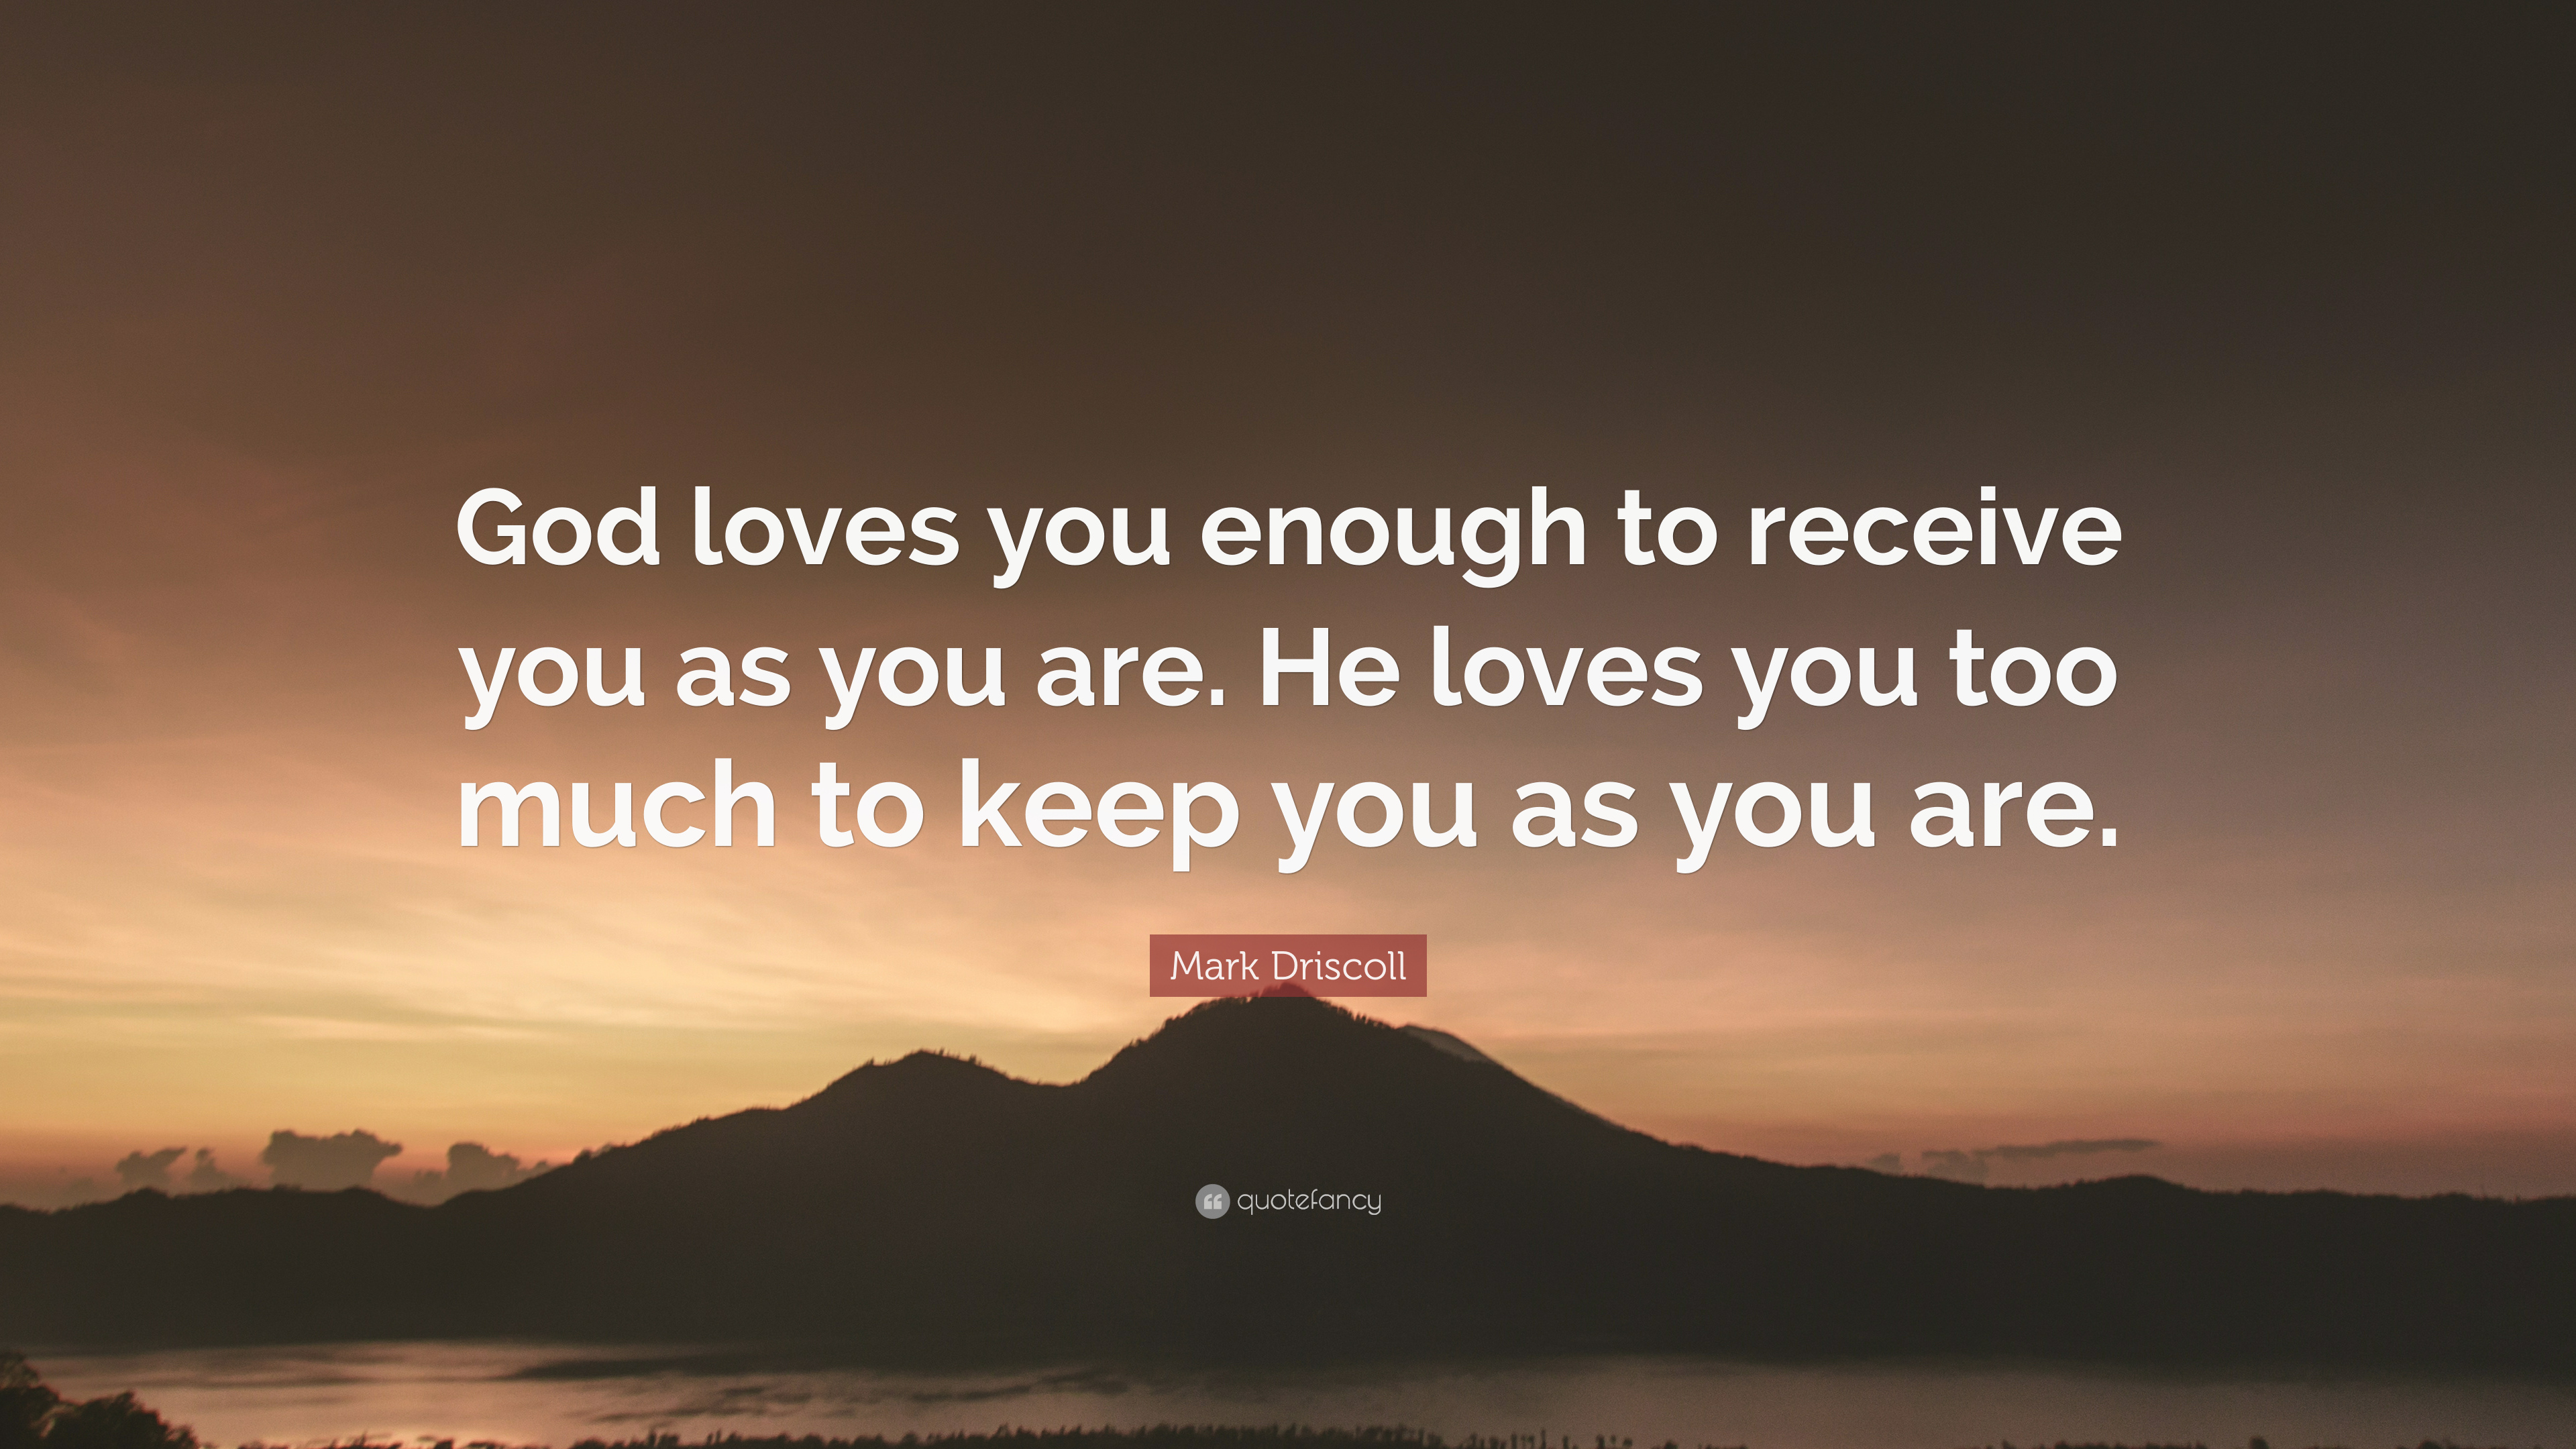 Mark Driscoll Quote: “God loves you enough to receive you as you are. He loves you